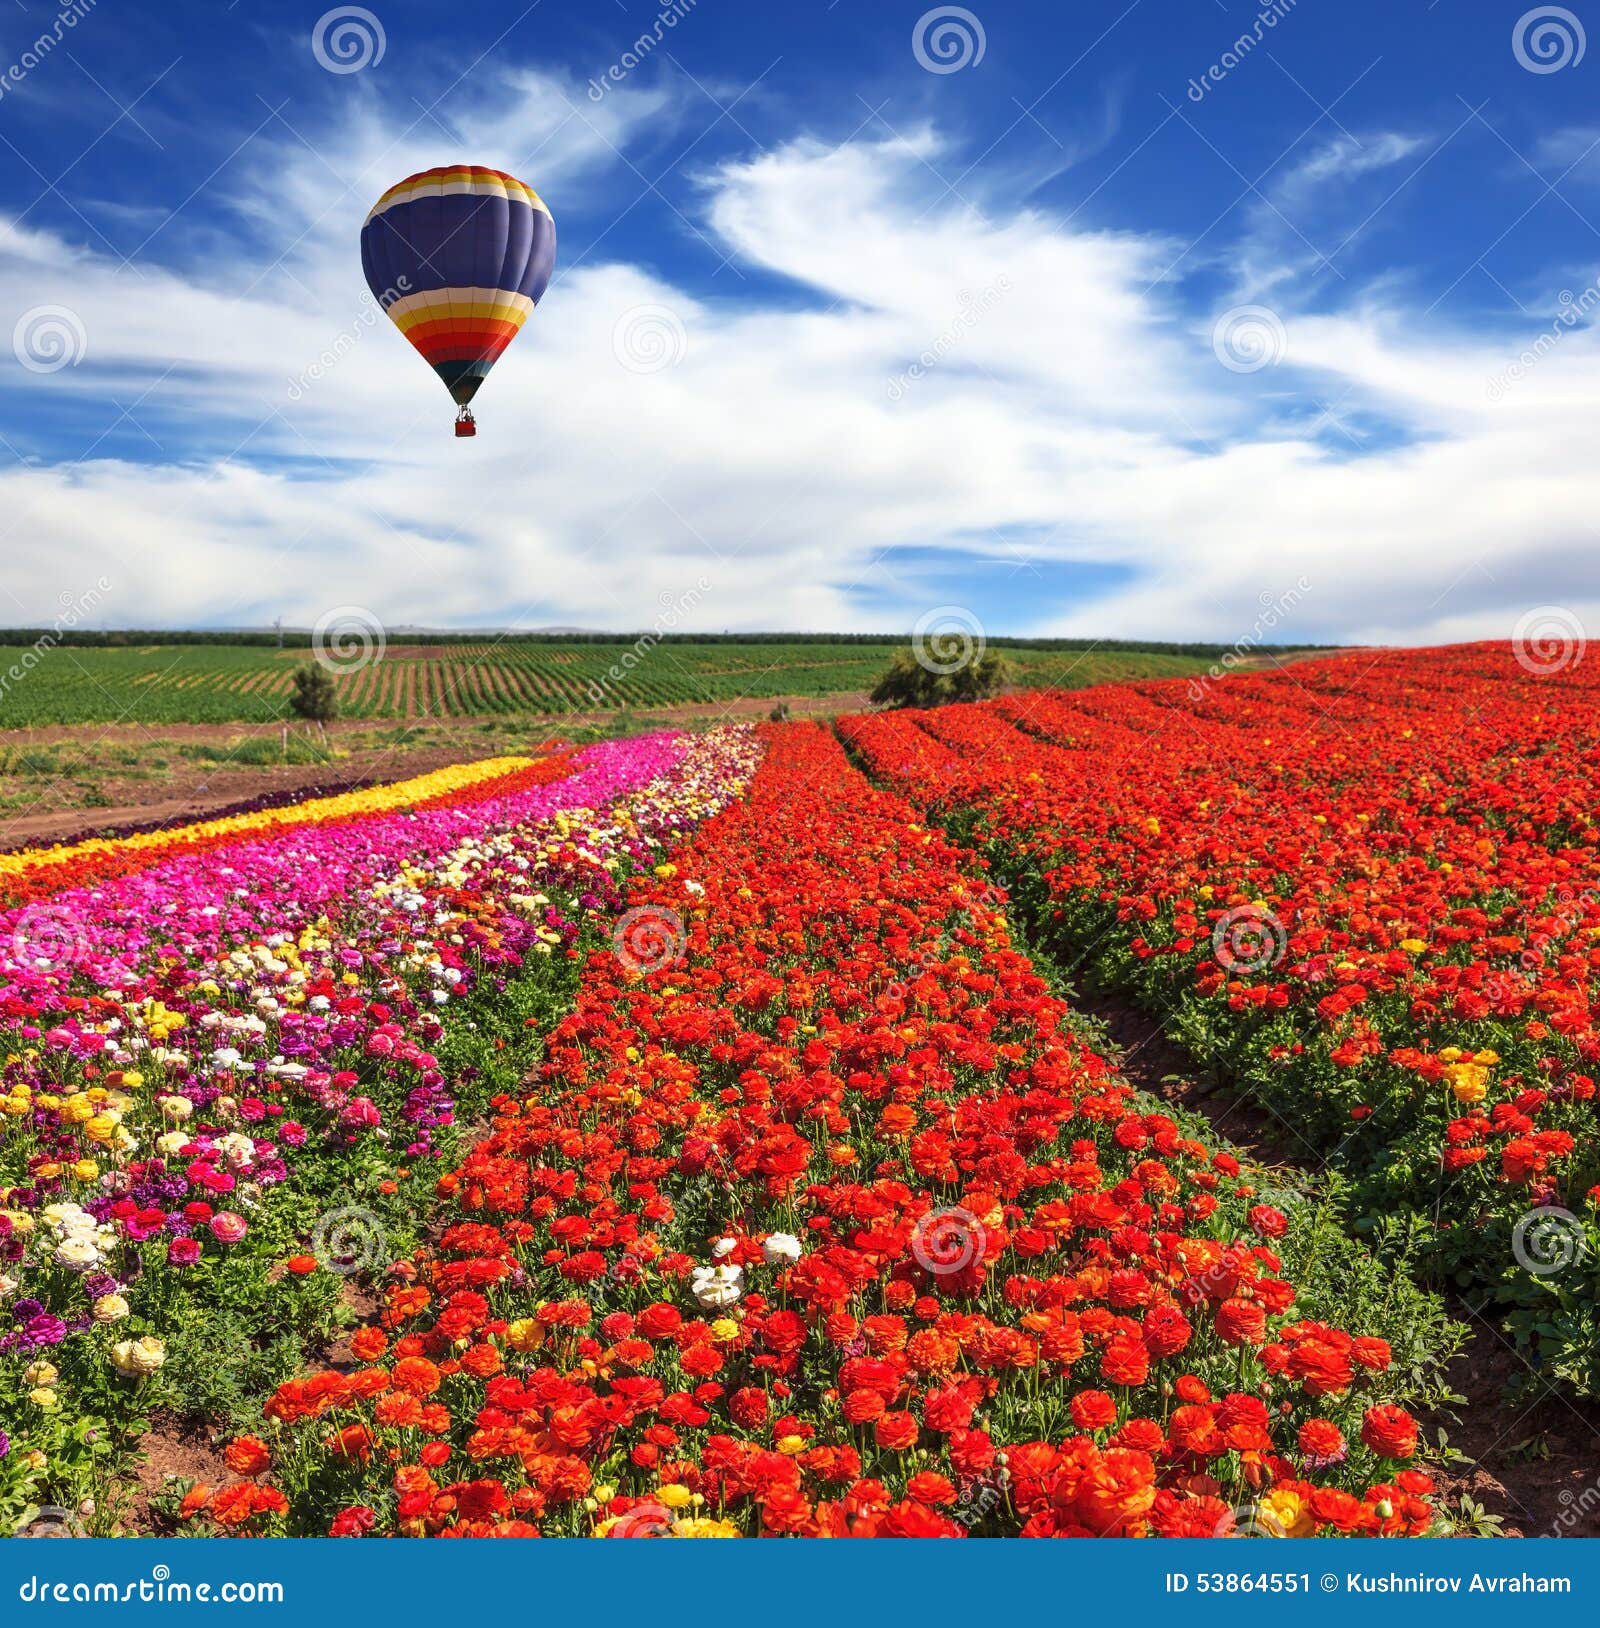 In the Sky Flying Scenic Balloon Stock Image - Image of ranunculus ...